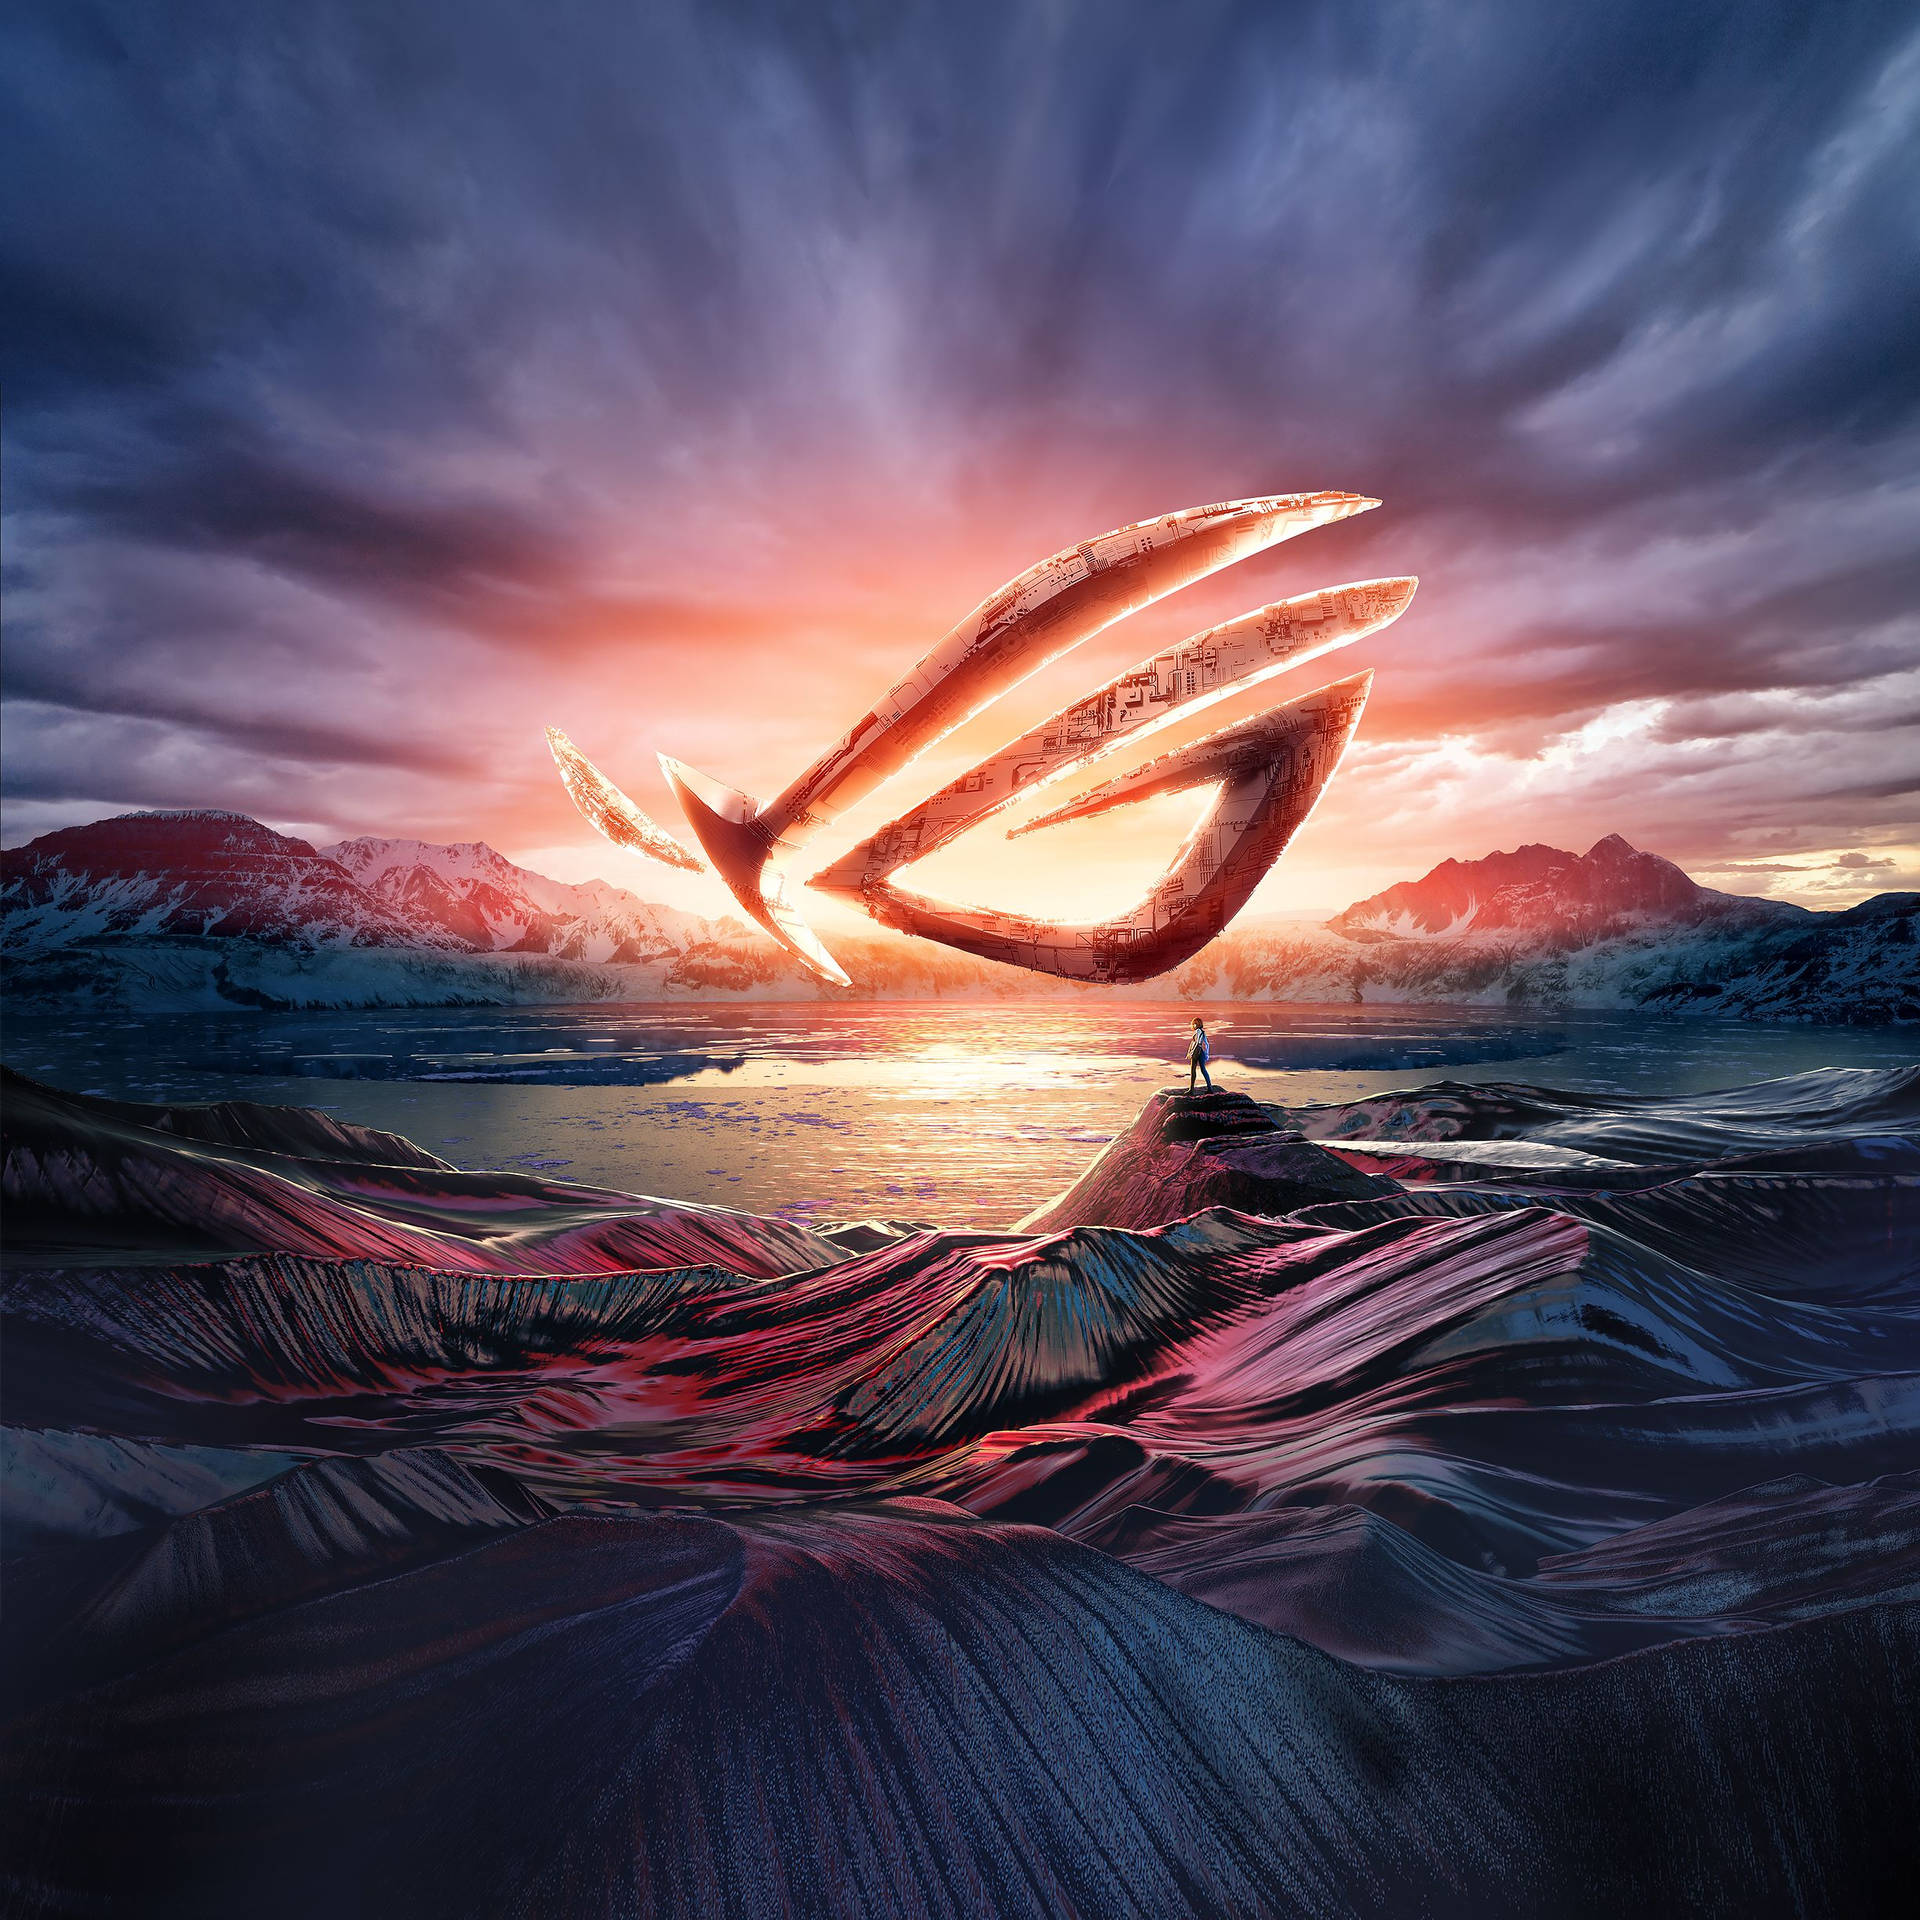 Asus 2448X2448 Wallpaper and Background Image